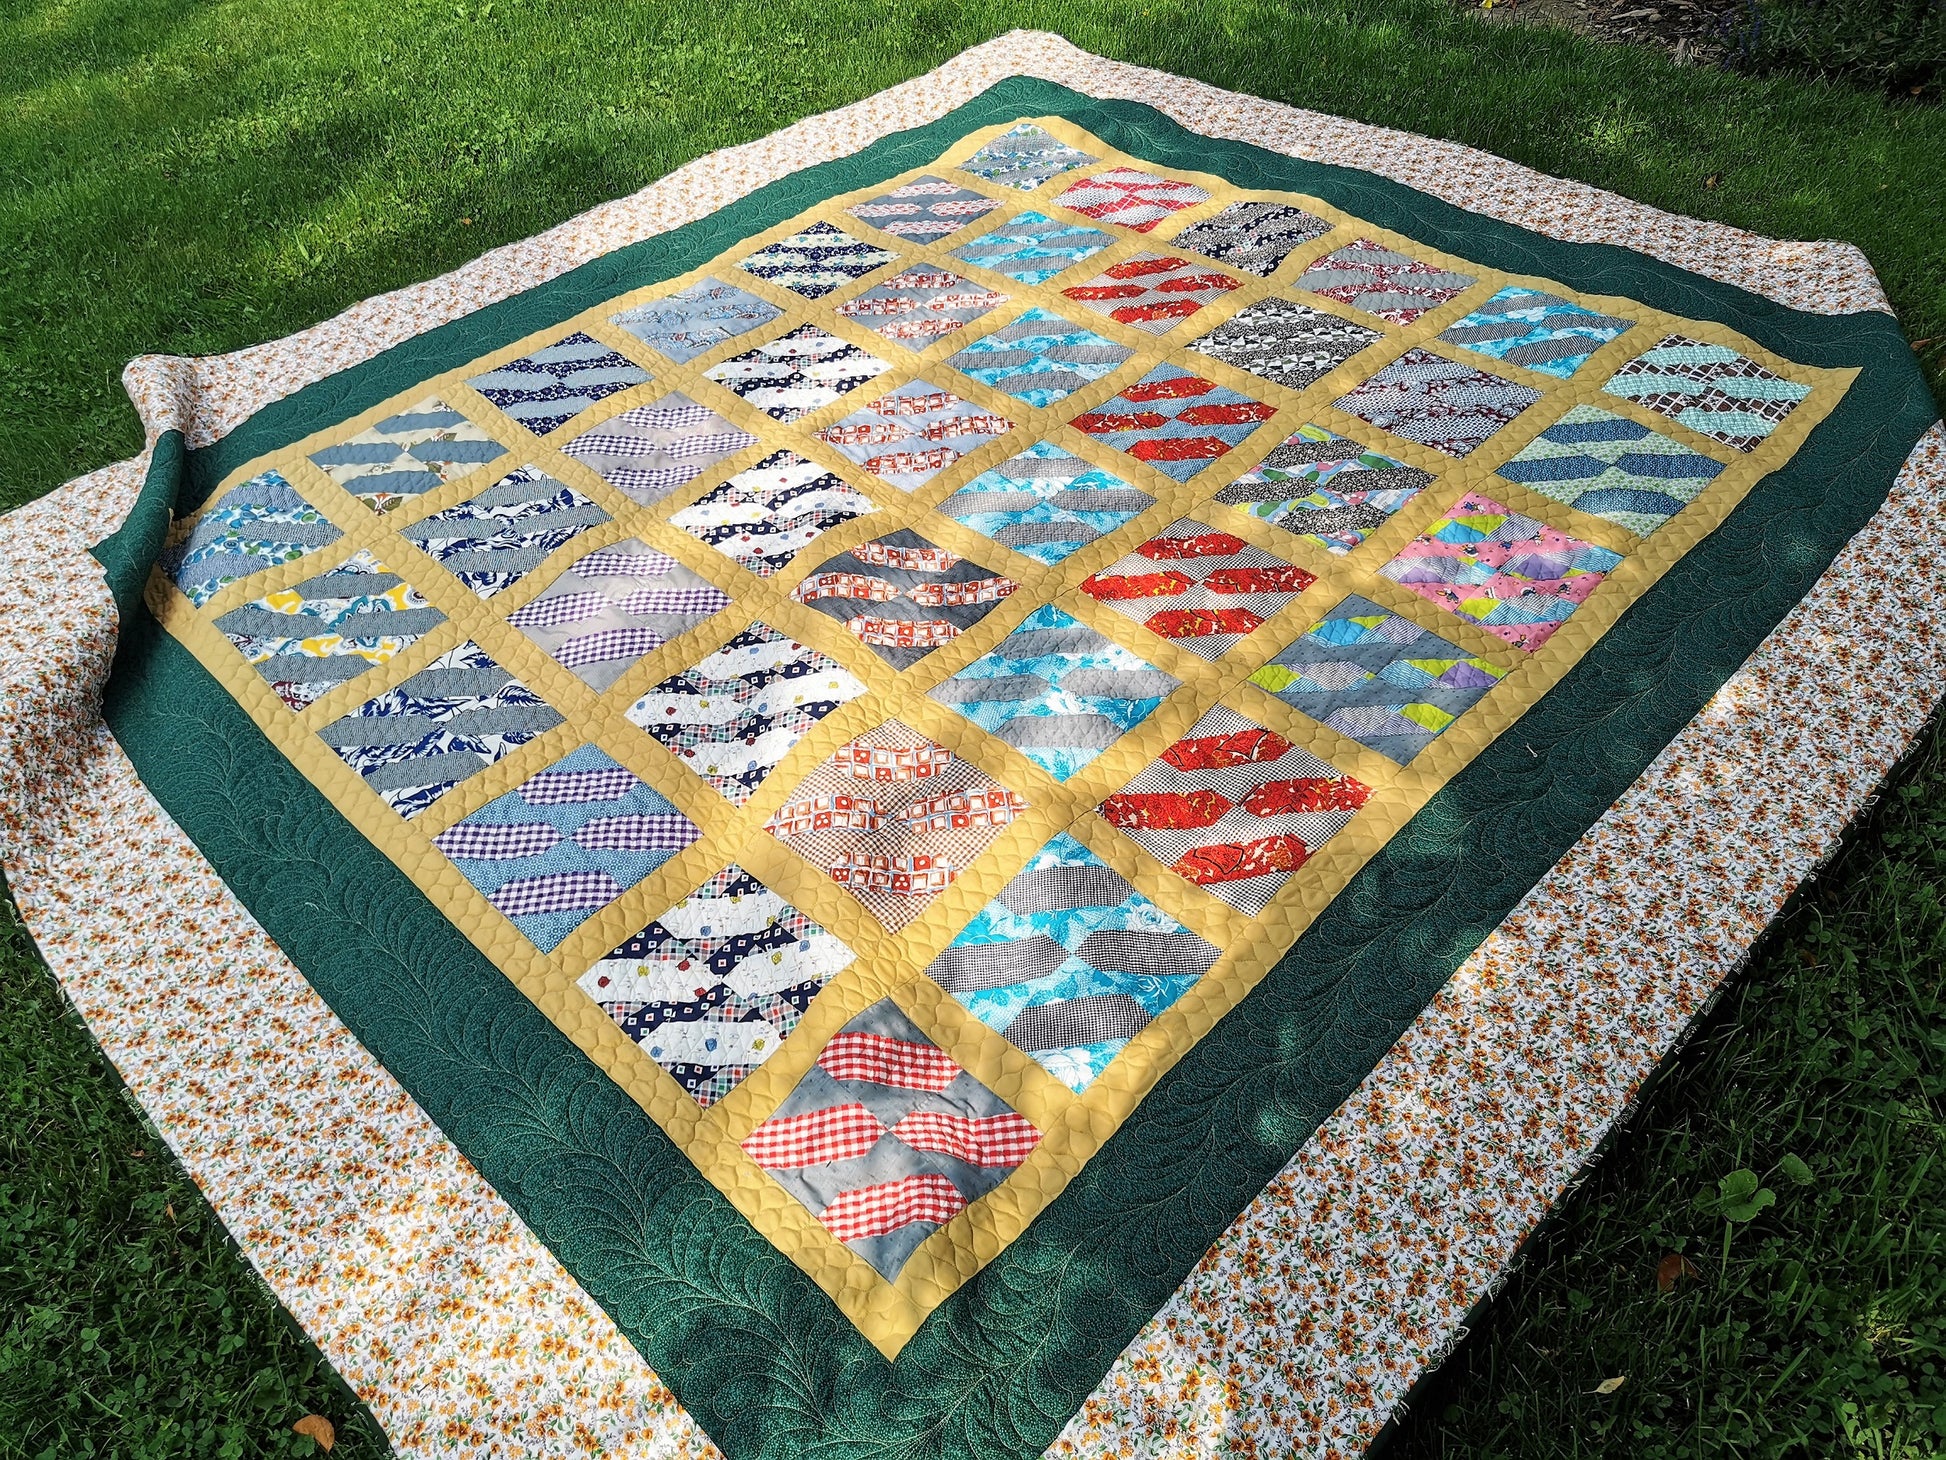 the vintage bed quilt shown outdoors in dappled sunlight. 